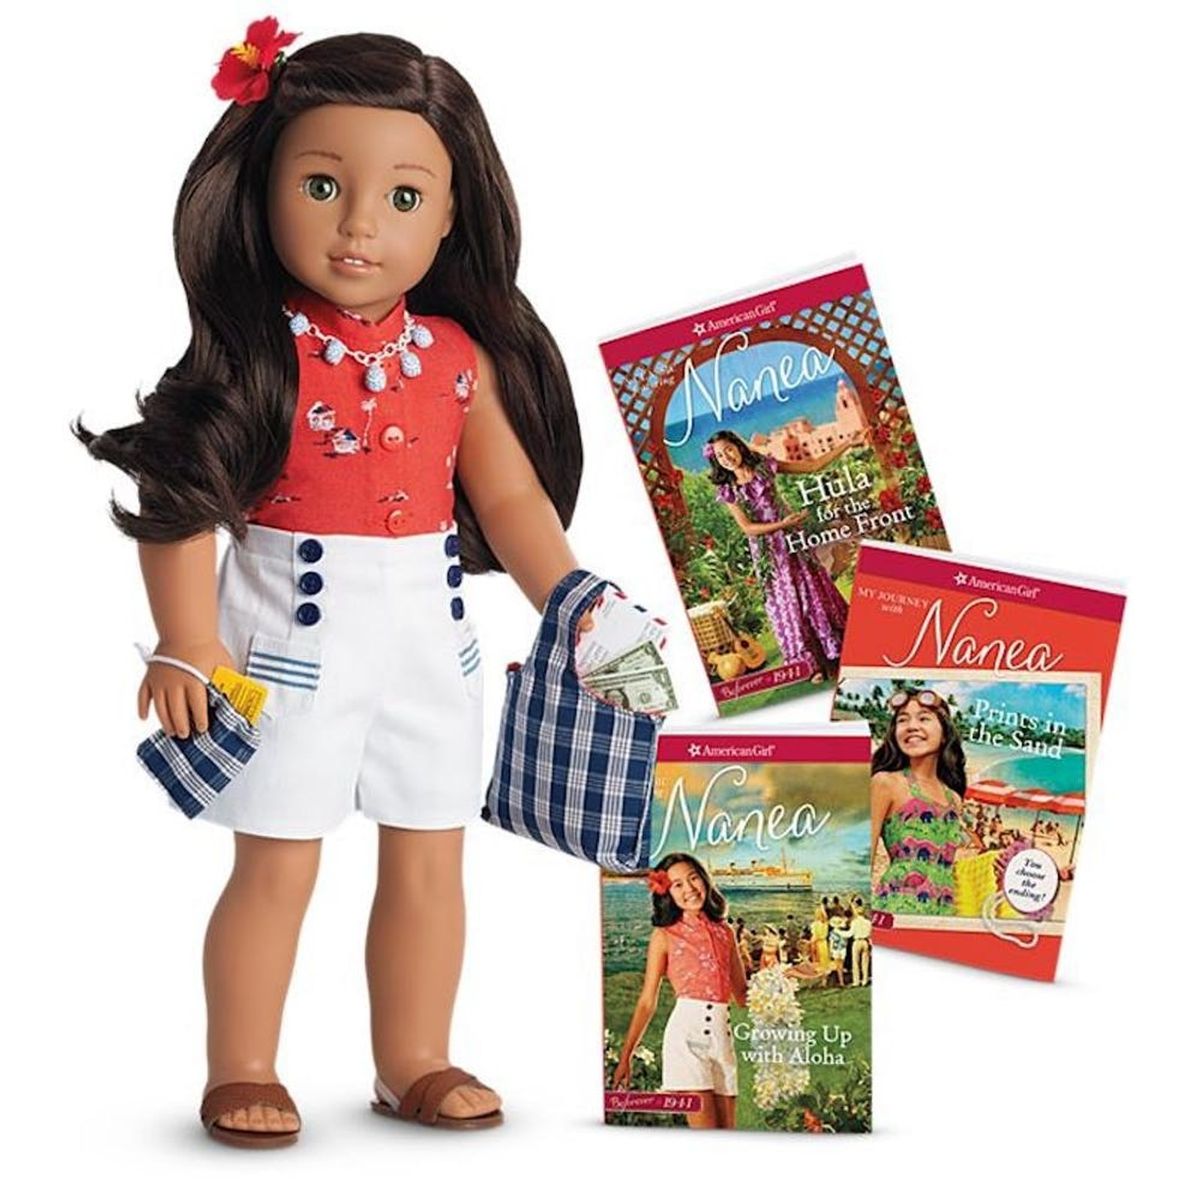 American Girl Has a Brand New Doll from Pearl Harbor-Era Hawaii